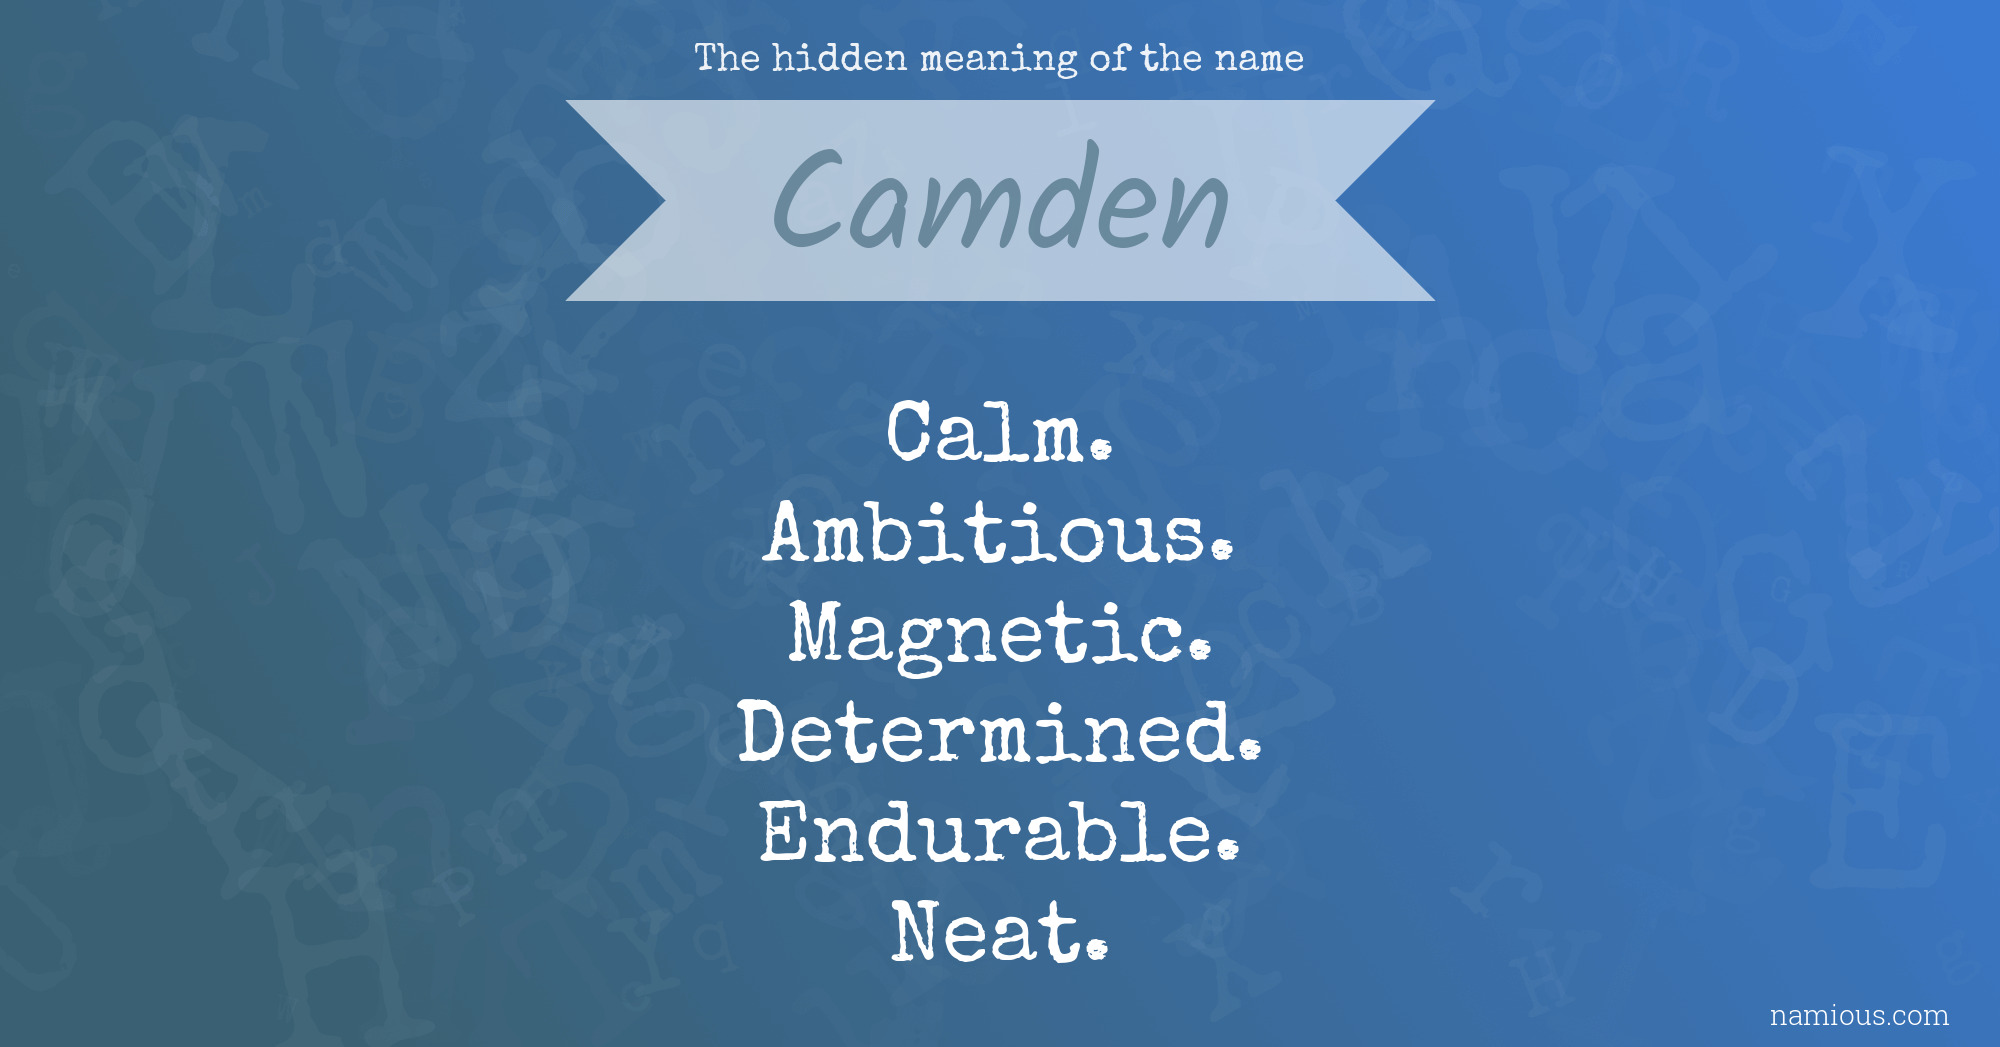 The hidden meaning of the name Camden